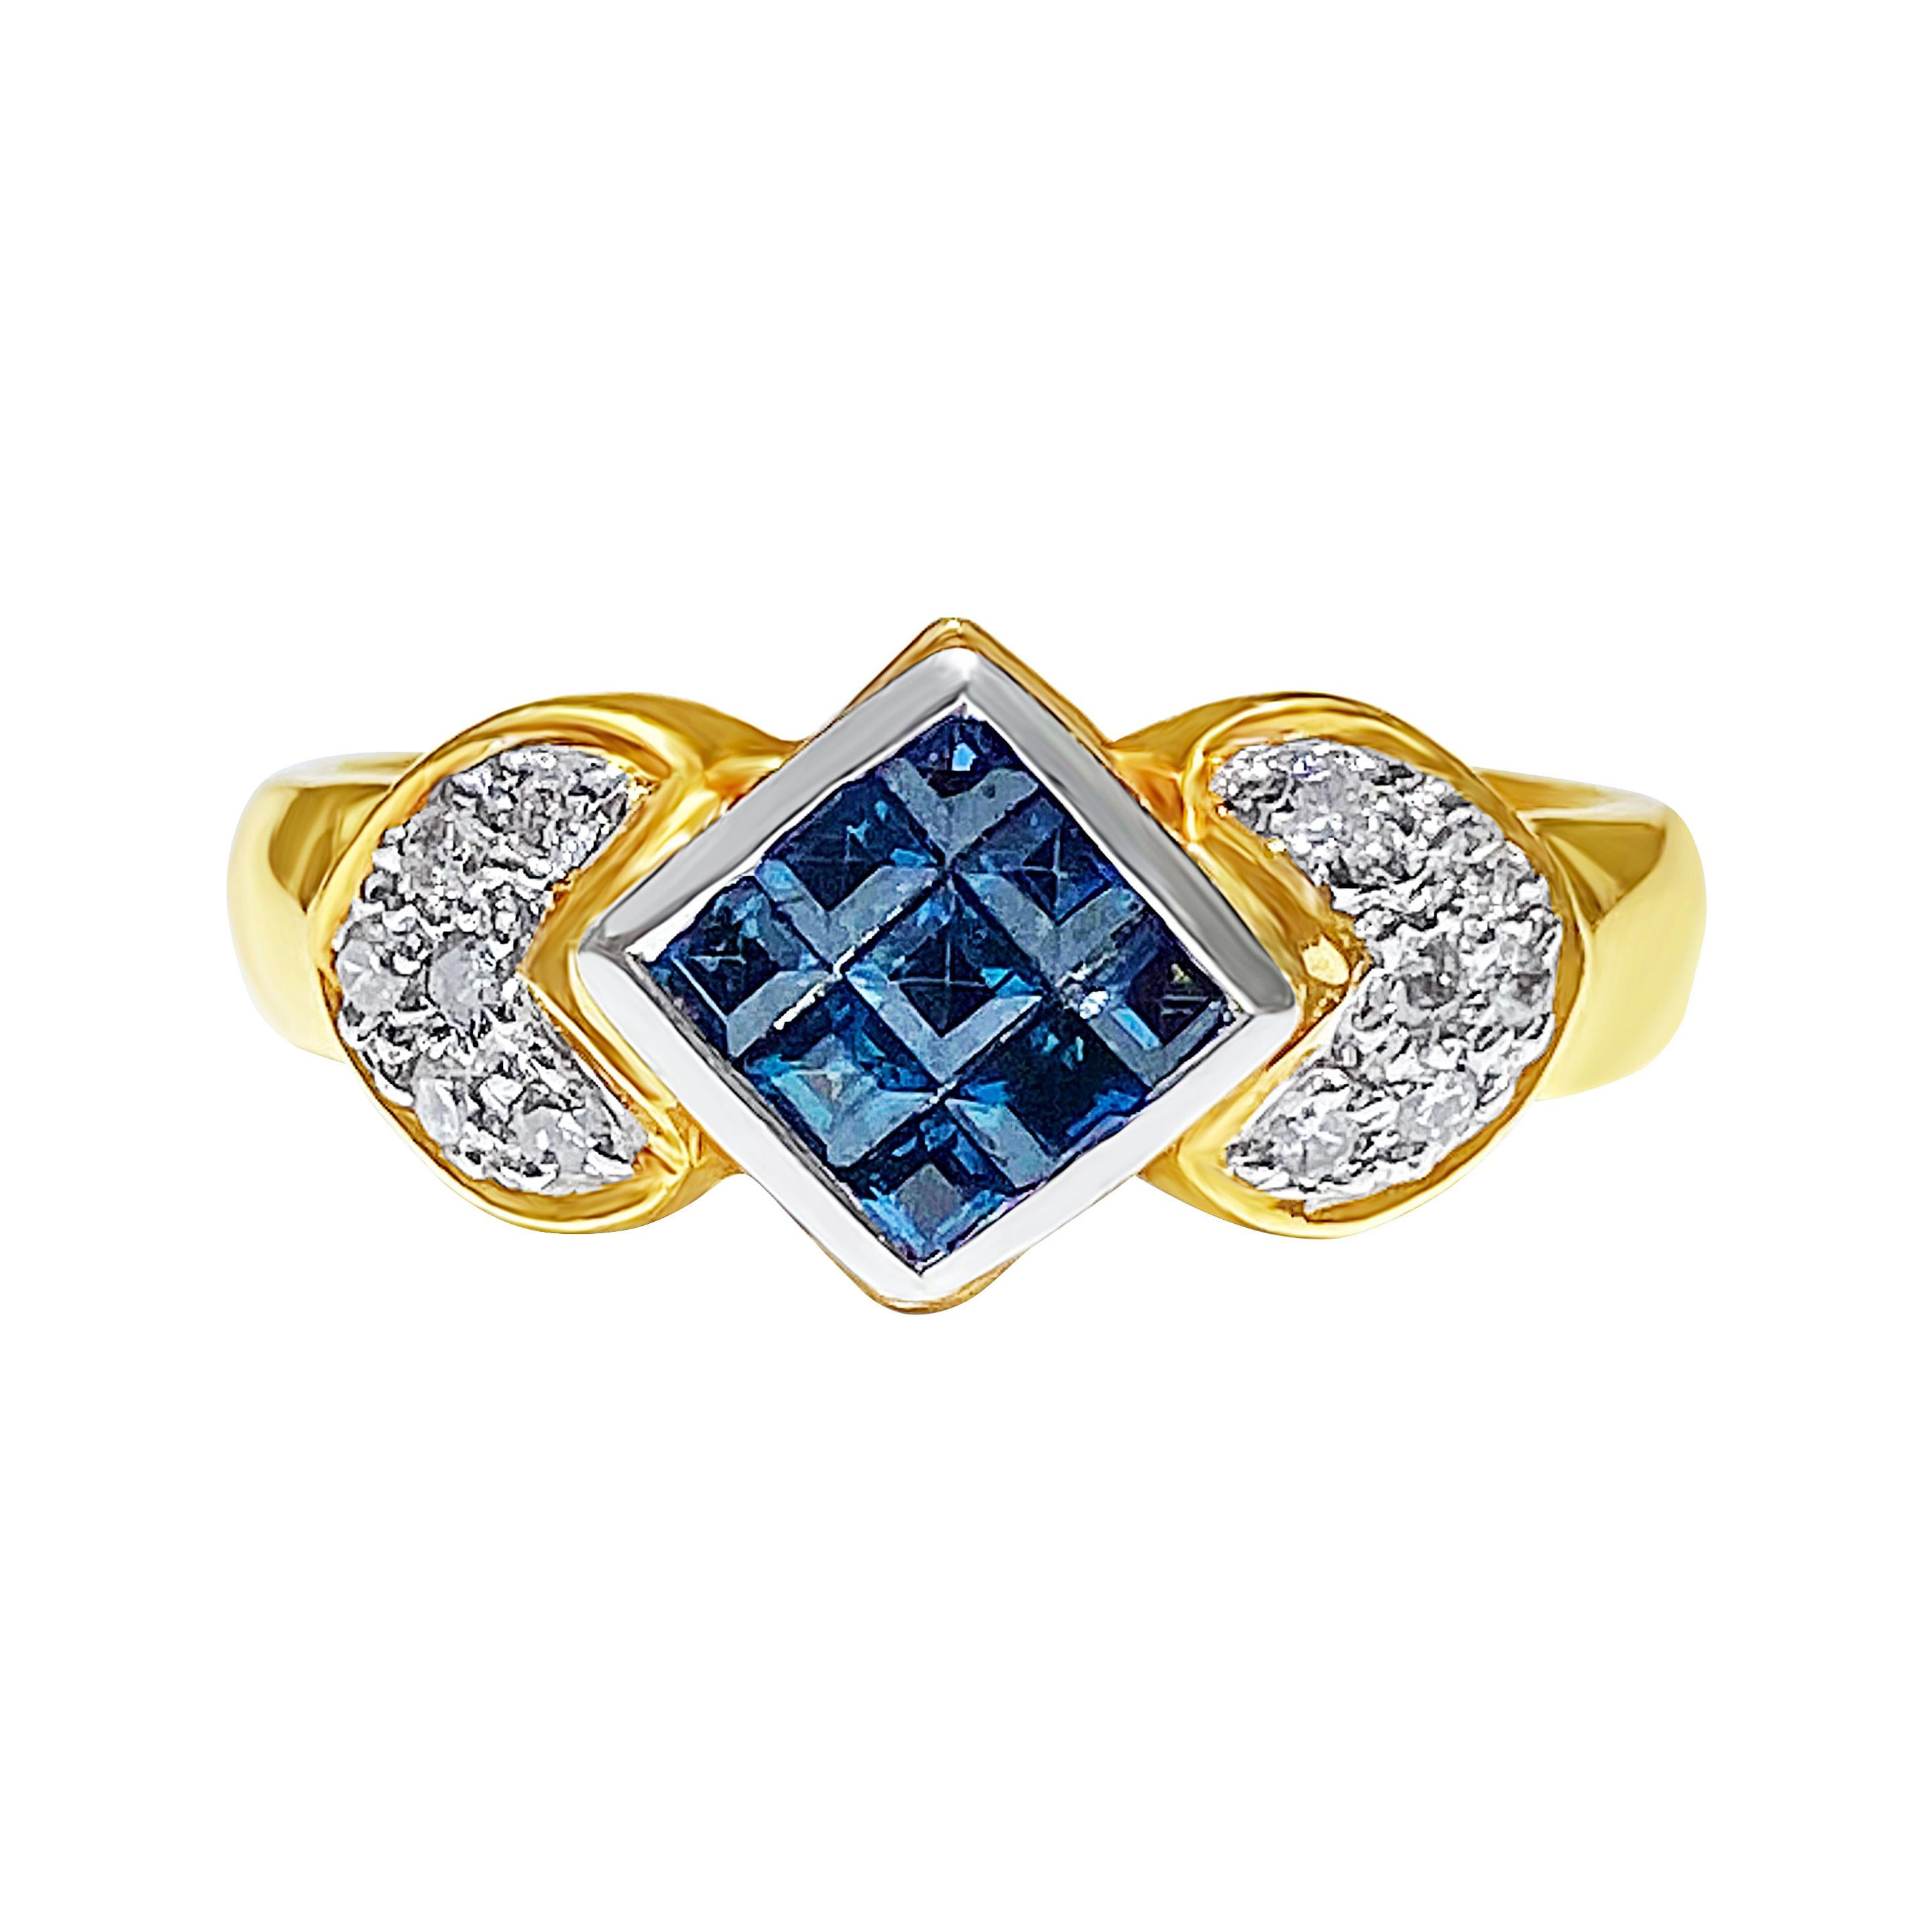 Princess-Cut Blue Sapphire and Diamond Ring in 14k Yellow Gold For Sale